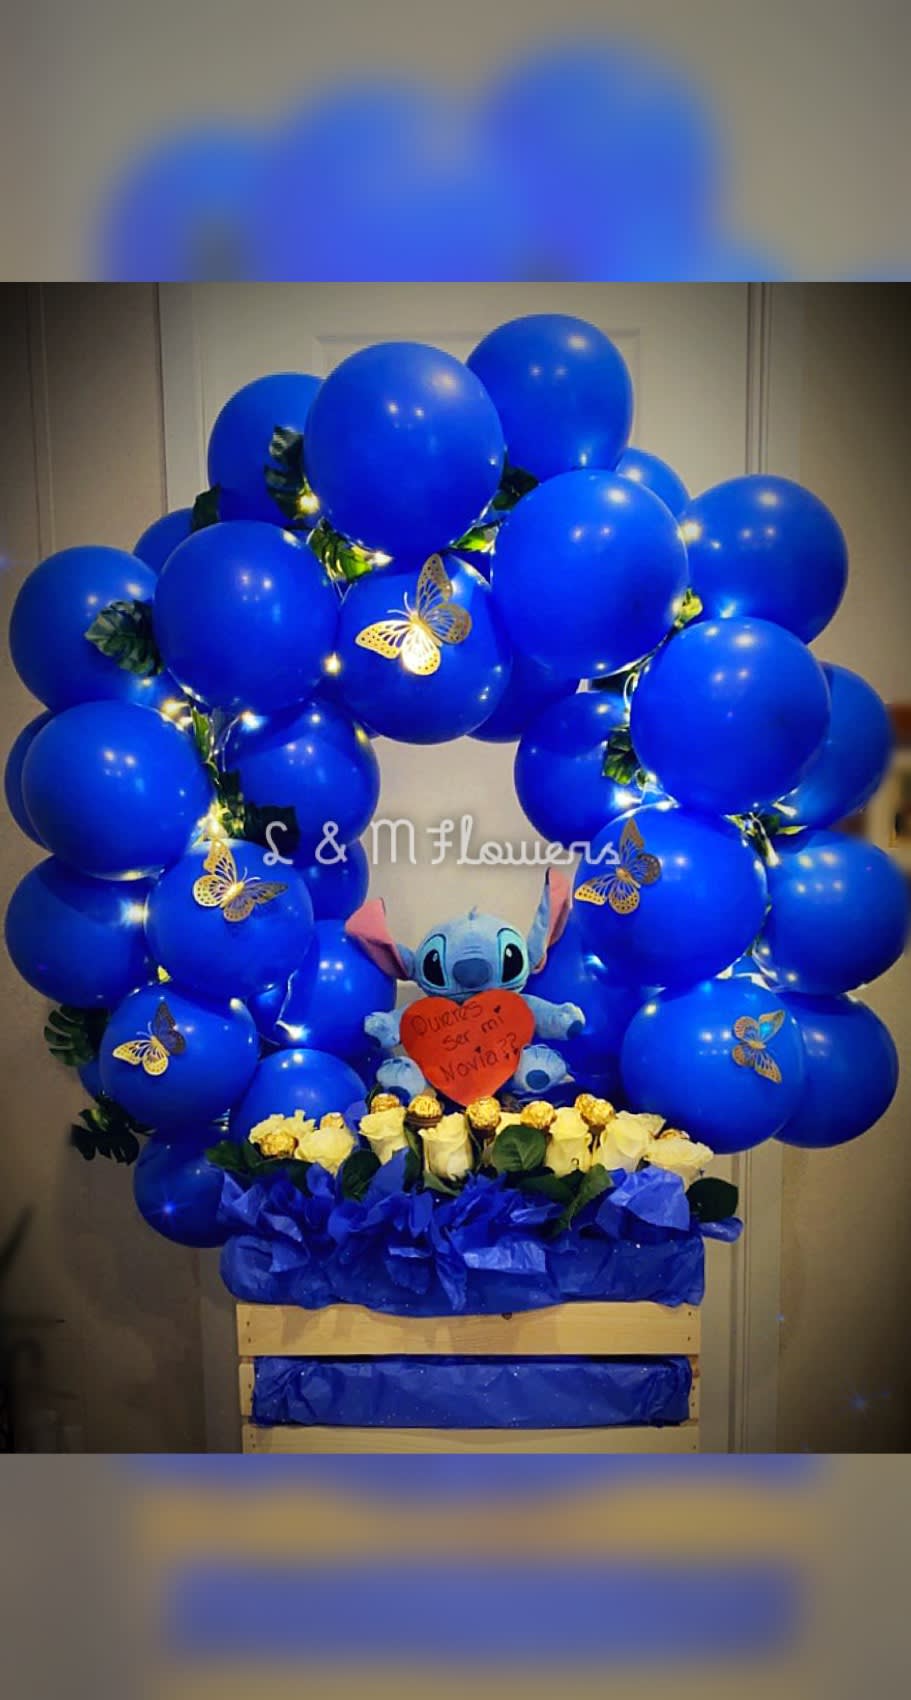 Our newest customer favorite arrangement will arrive with an arch of balloons